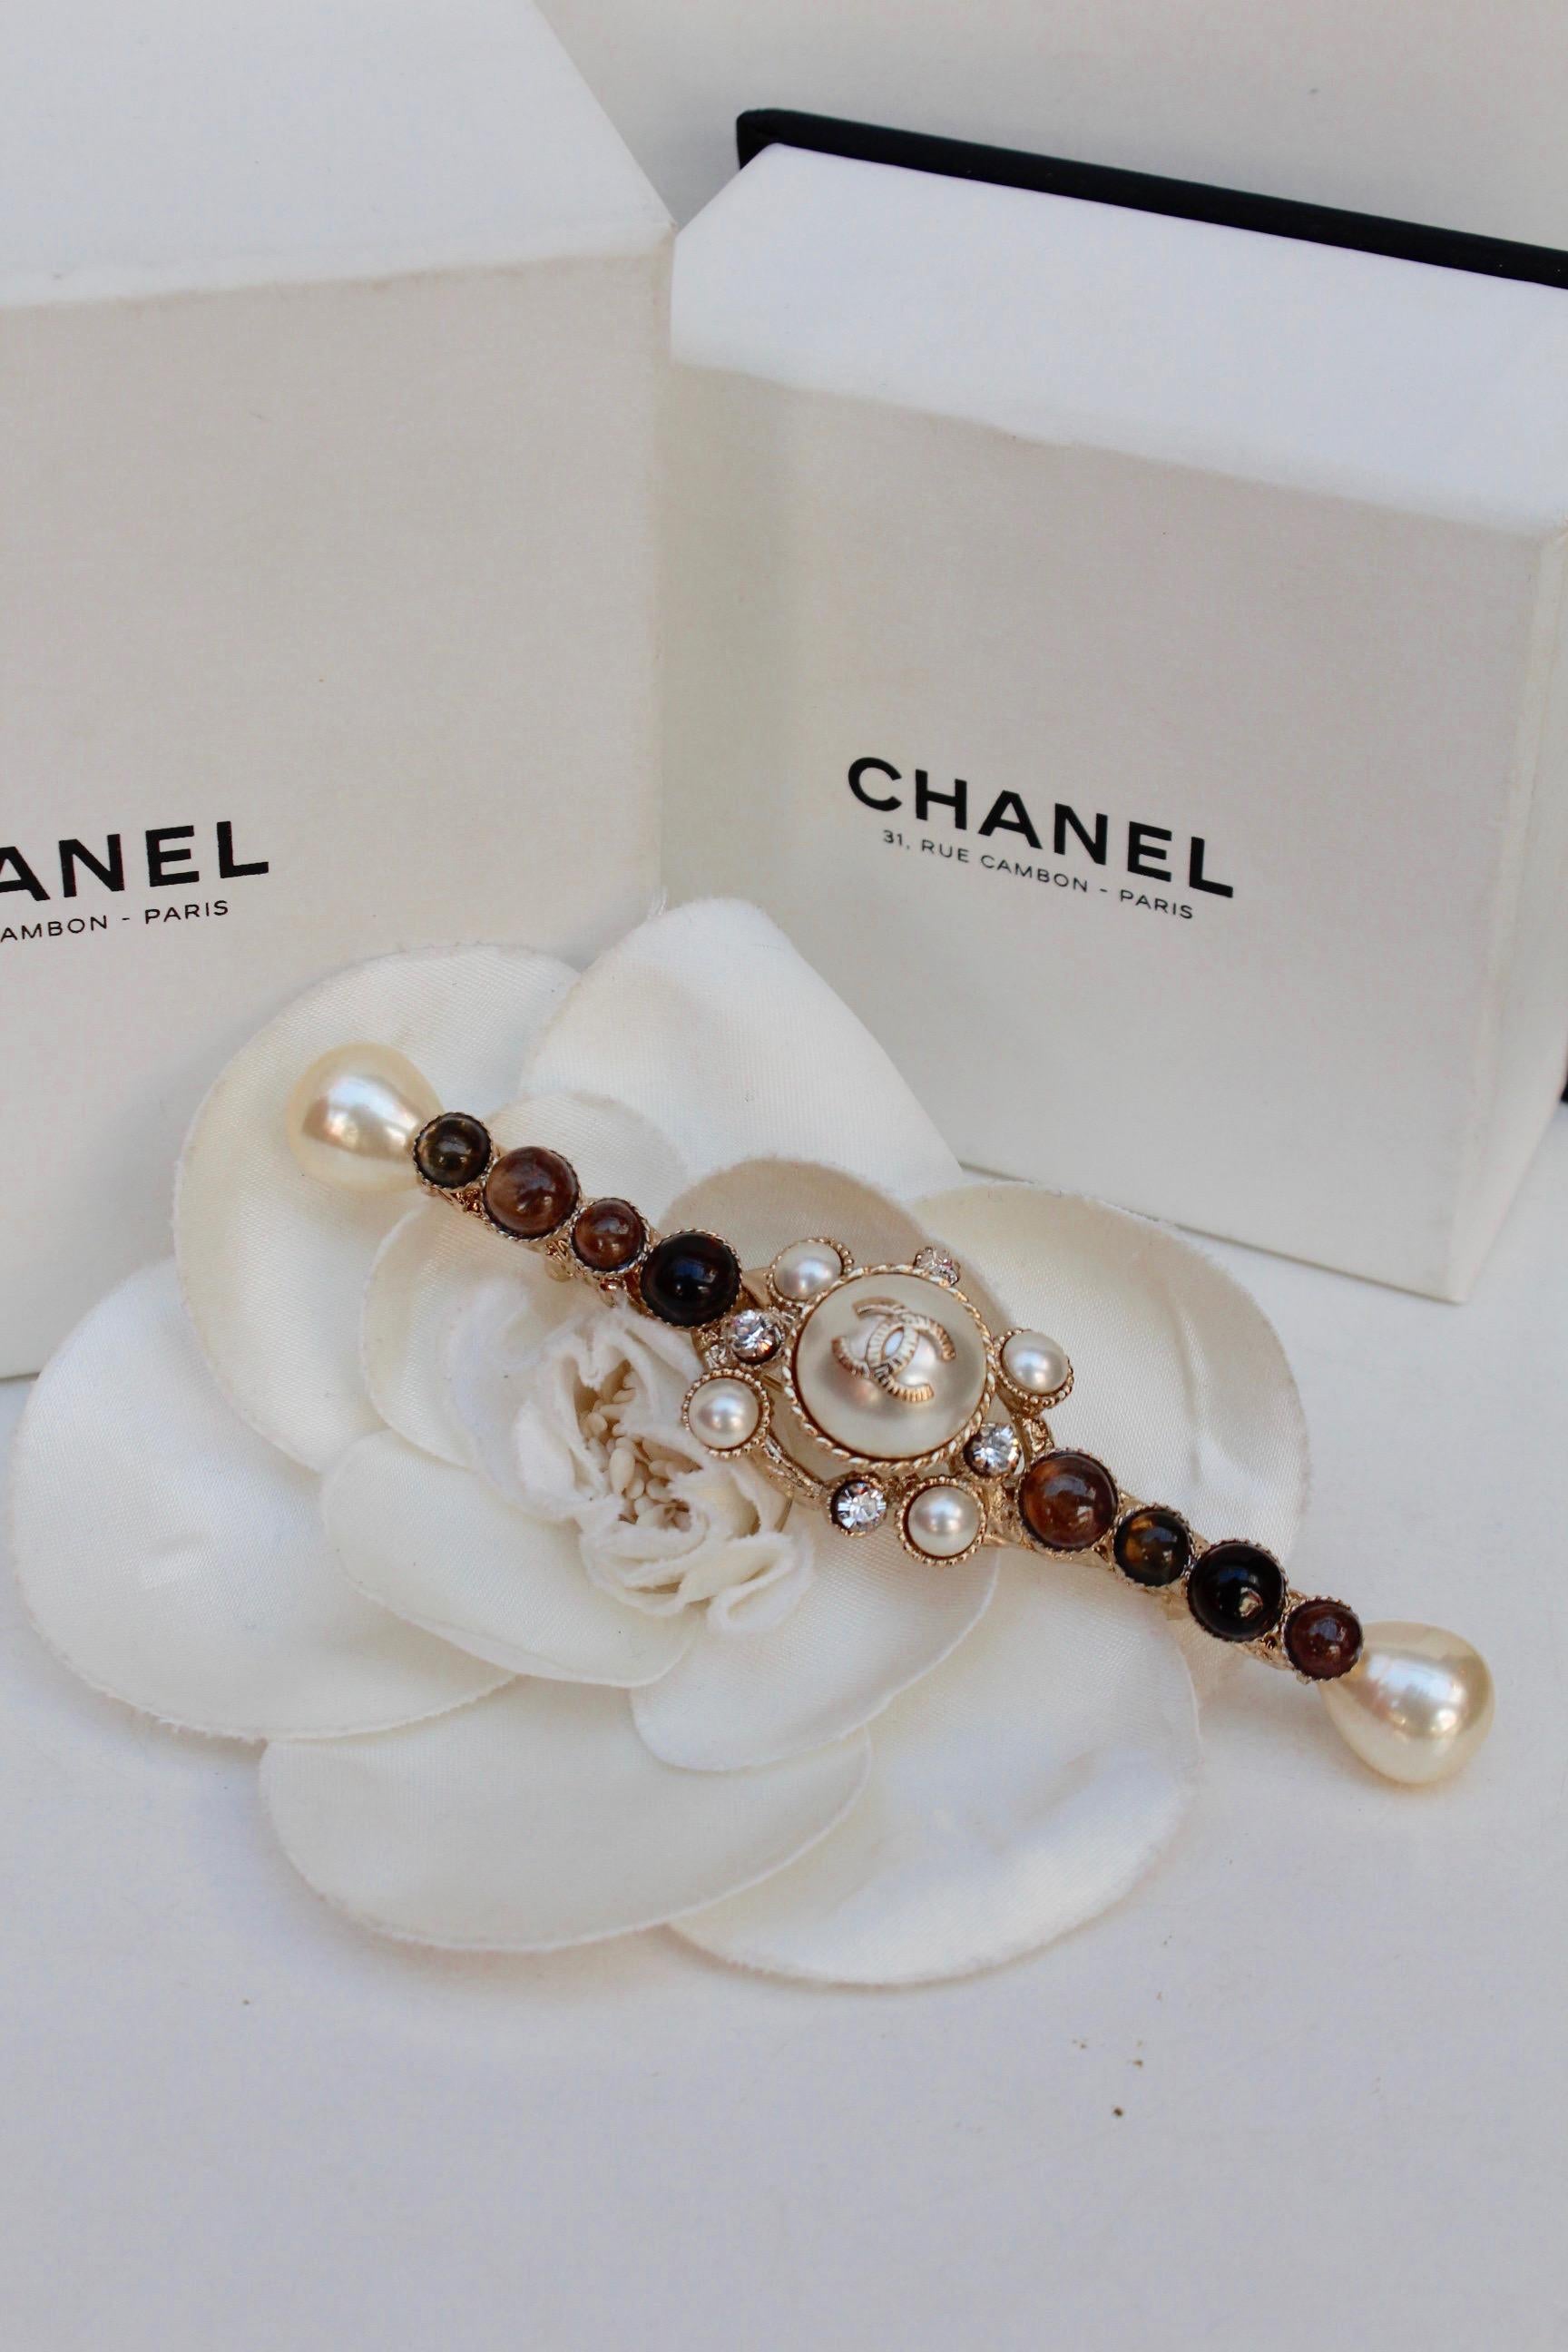 CHANEL (Made in France)
Stunning long light gilted metal brooch with brown, dark brown and pearly glass paste cabochons, decorated with rhinestones. The middle of the piece is made of a pearly rounded cabochon, centered by a light gilted metal